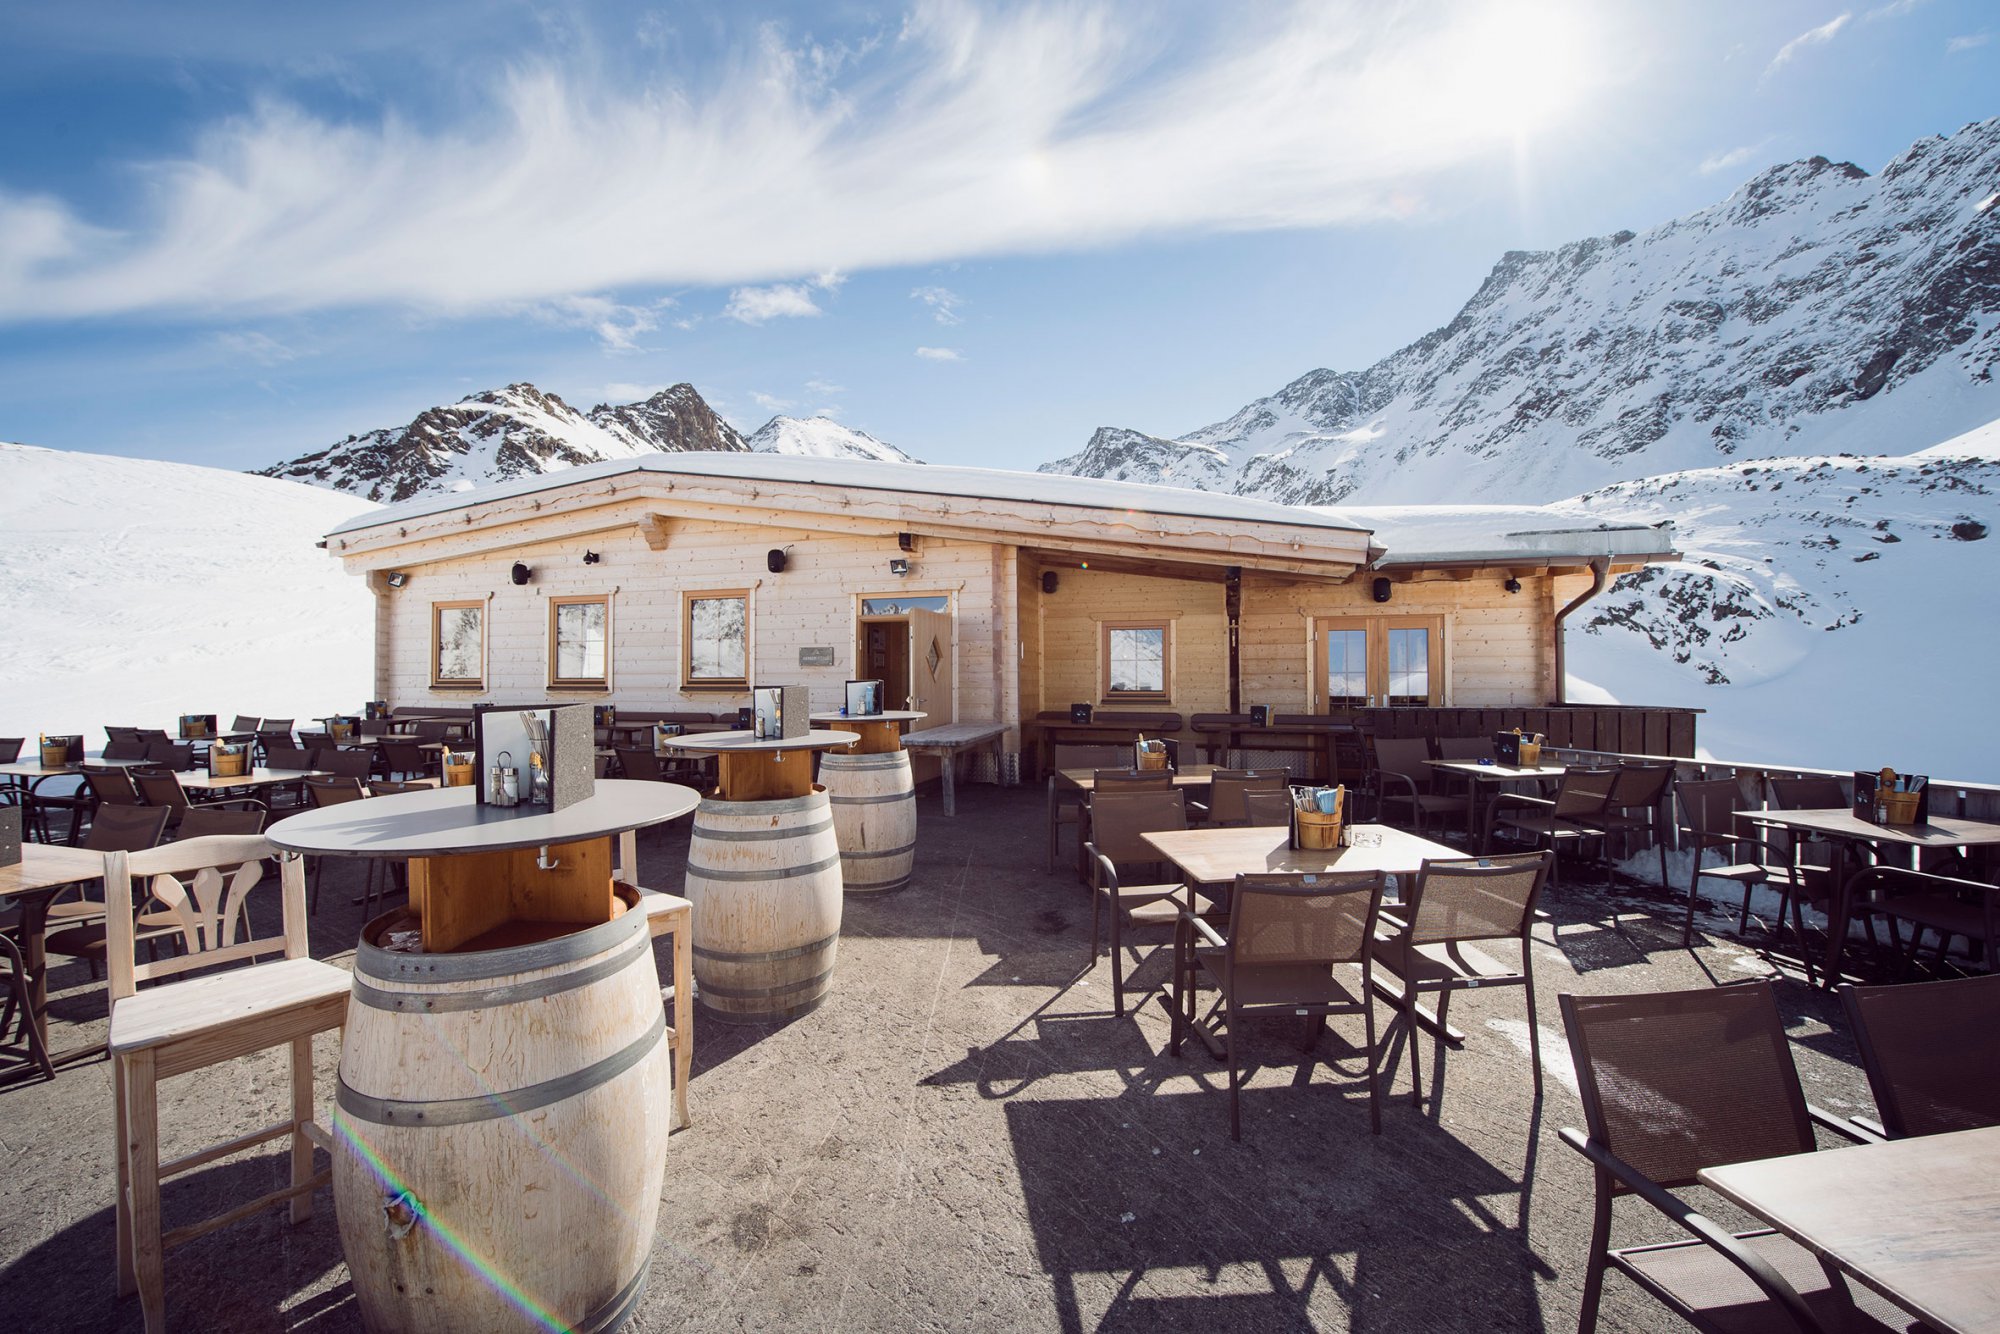 The panoramic terrace at the Drei Seen Hütte is the right place for après ski drinks